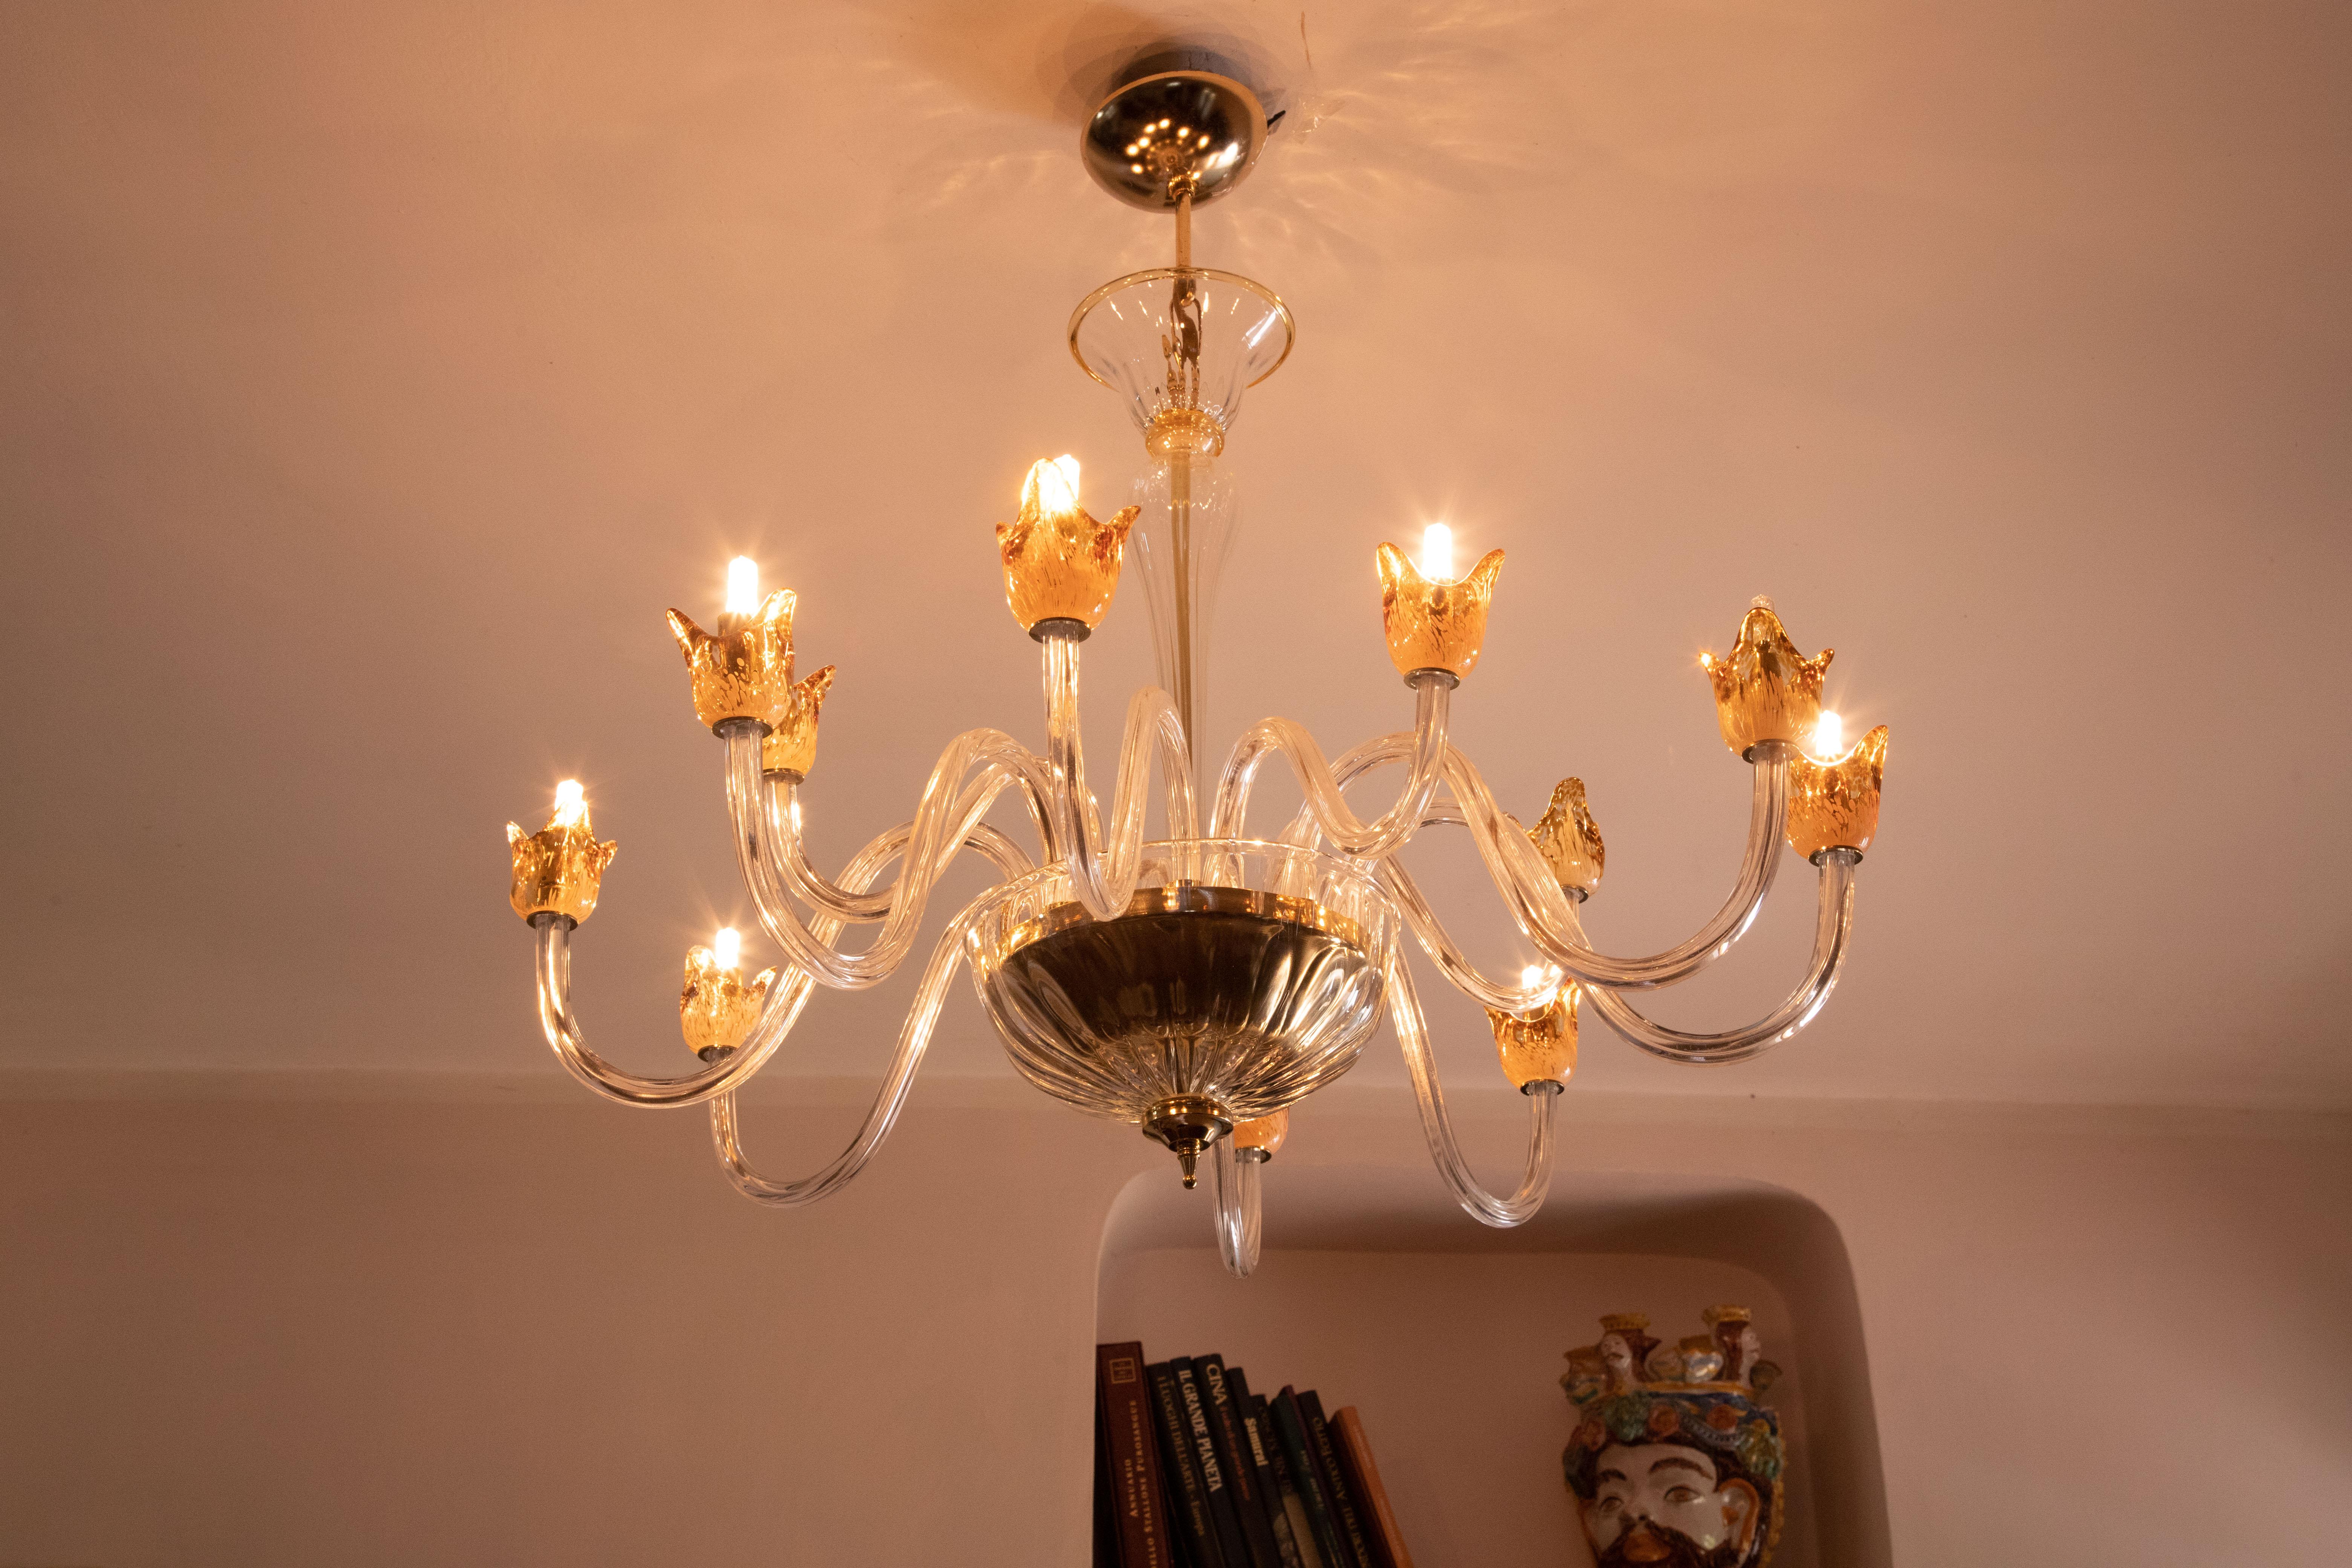 Murano chandelier 12 arms 12 light points.

All 12 arms have fire-shaped glass outside the lamp holders.

The chandelier is in perfect condition with all its original elements.

On request is possible add or remove chain for customize the high.